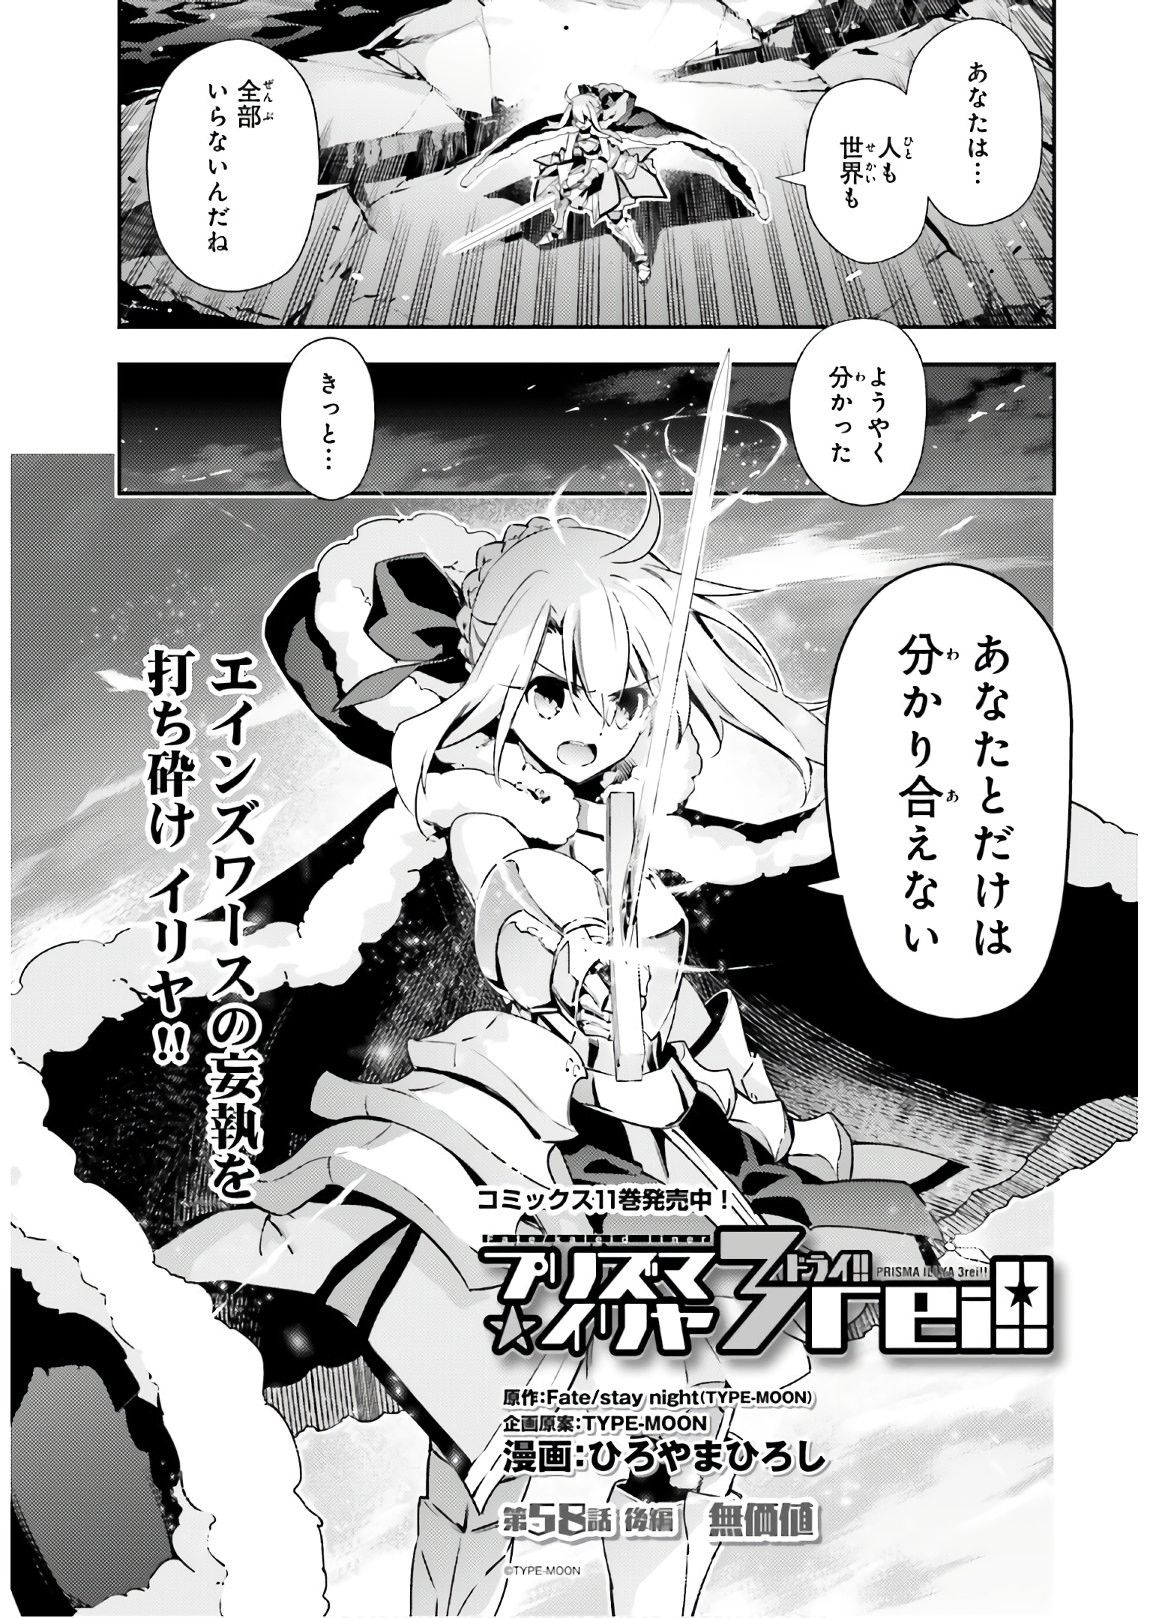 Fate/Kaleid Liner Prisma Illya Drei! - Chapter 58-2 - Page 1